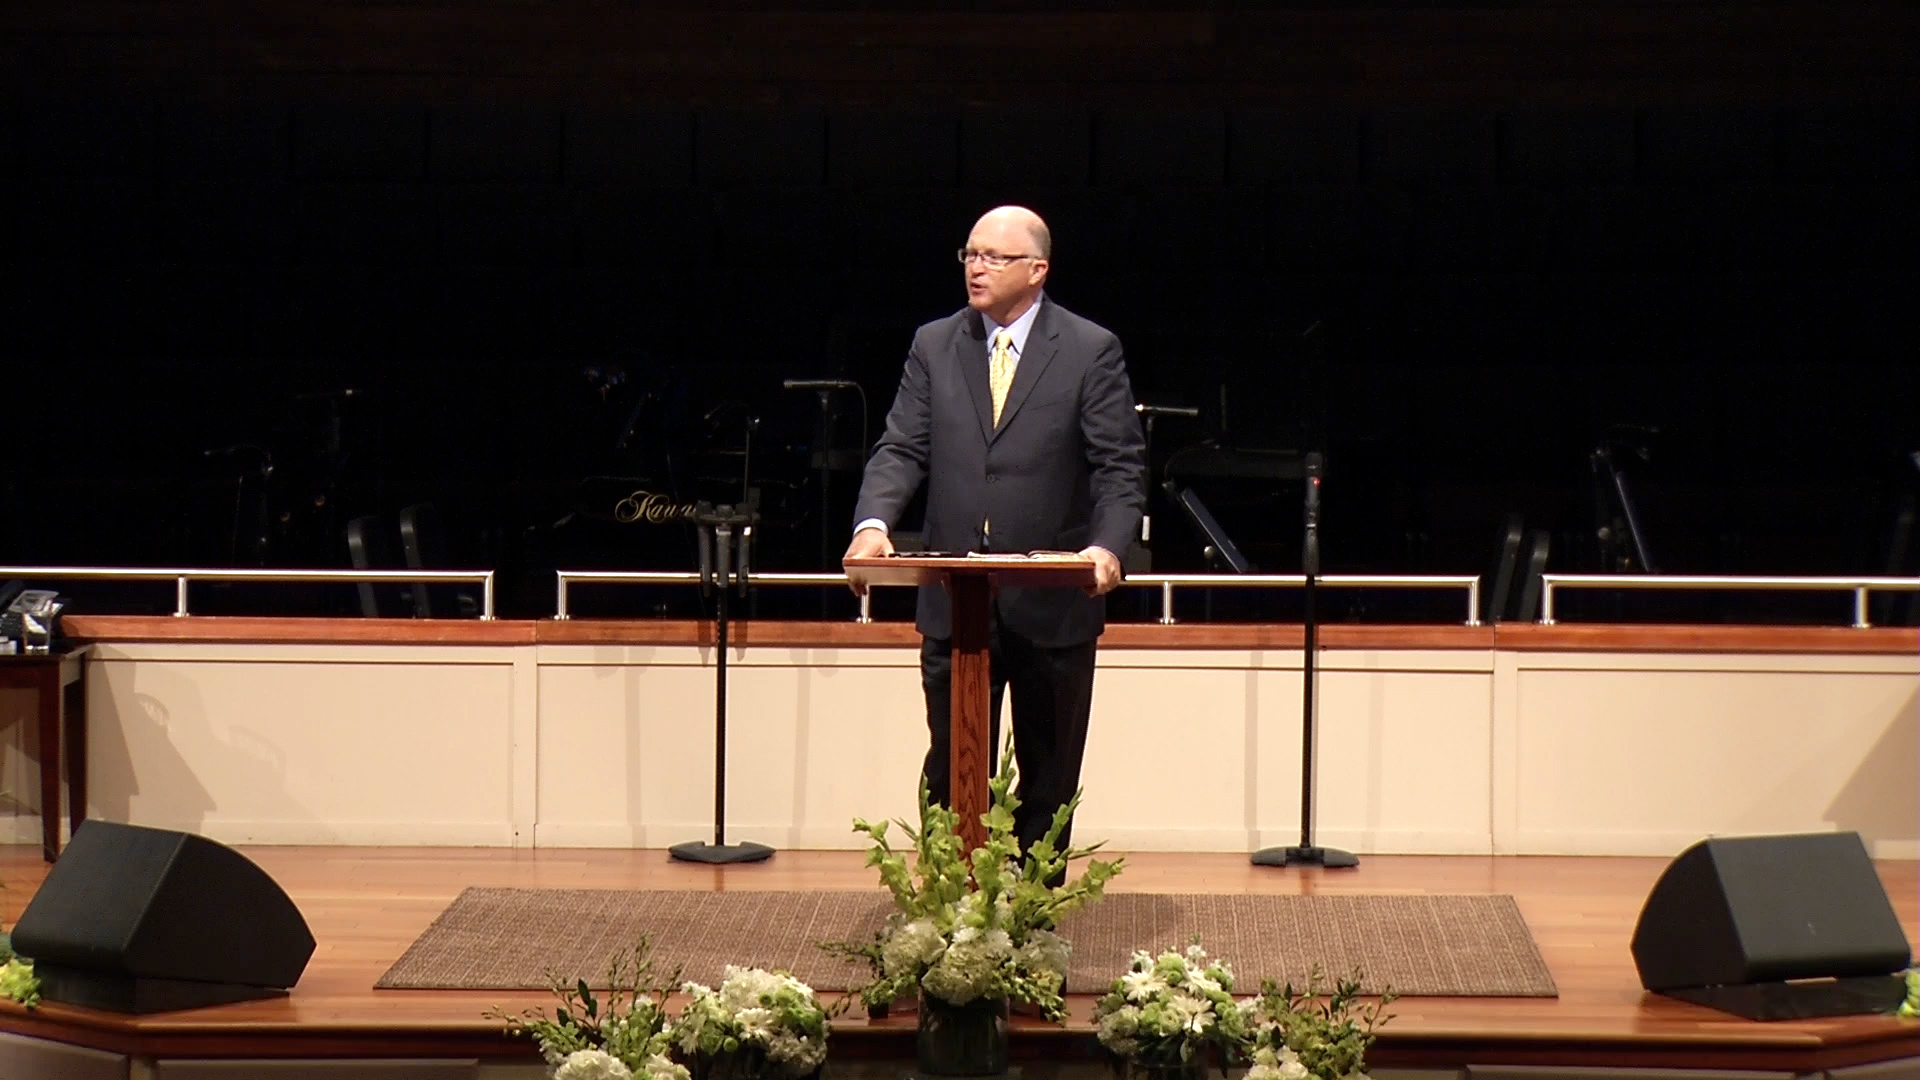 Pastor Paul Chappell: Grace for the Growing Church